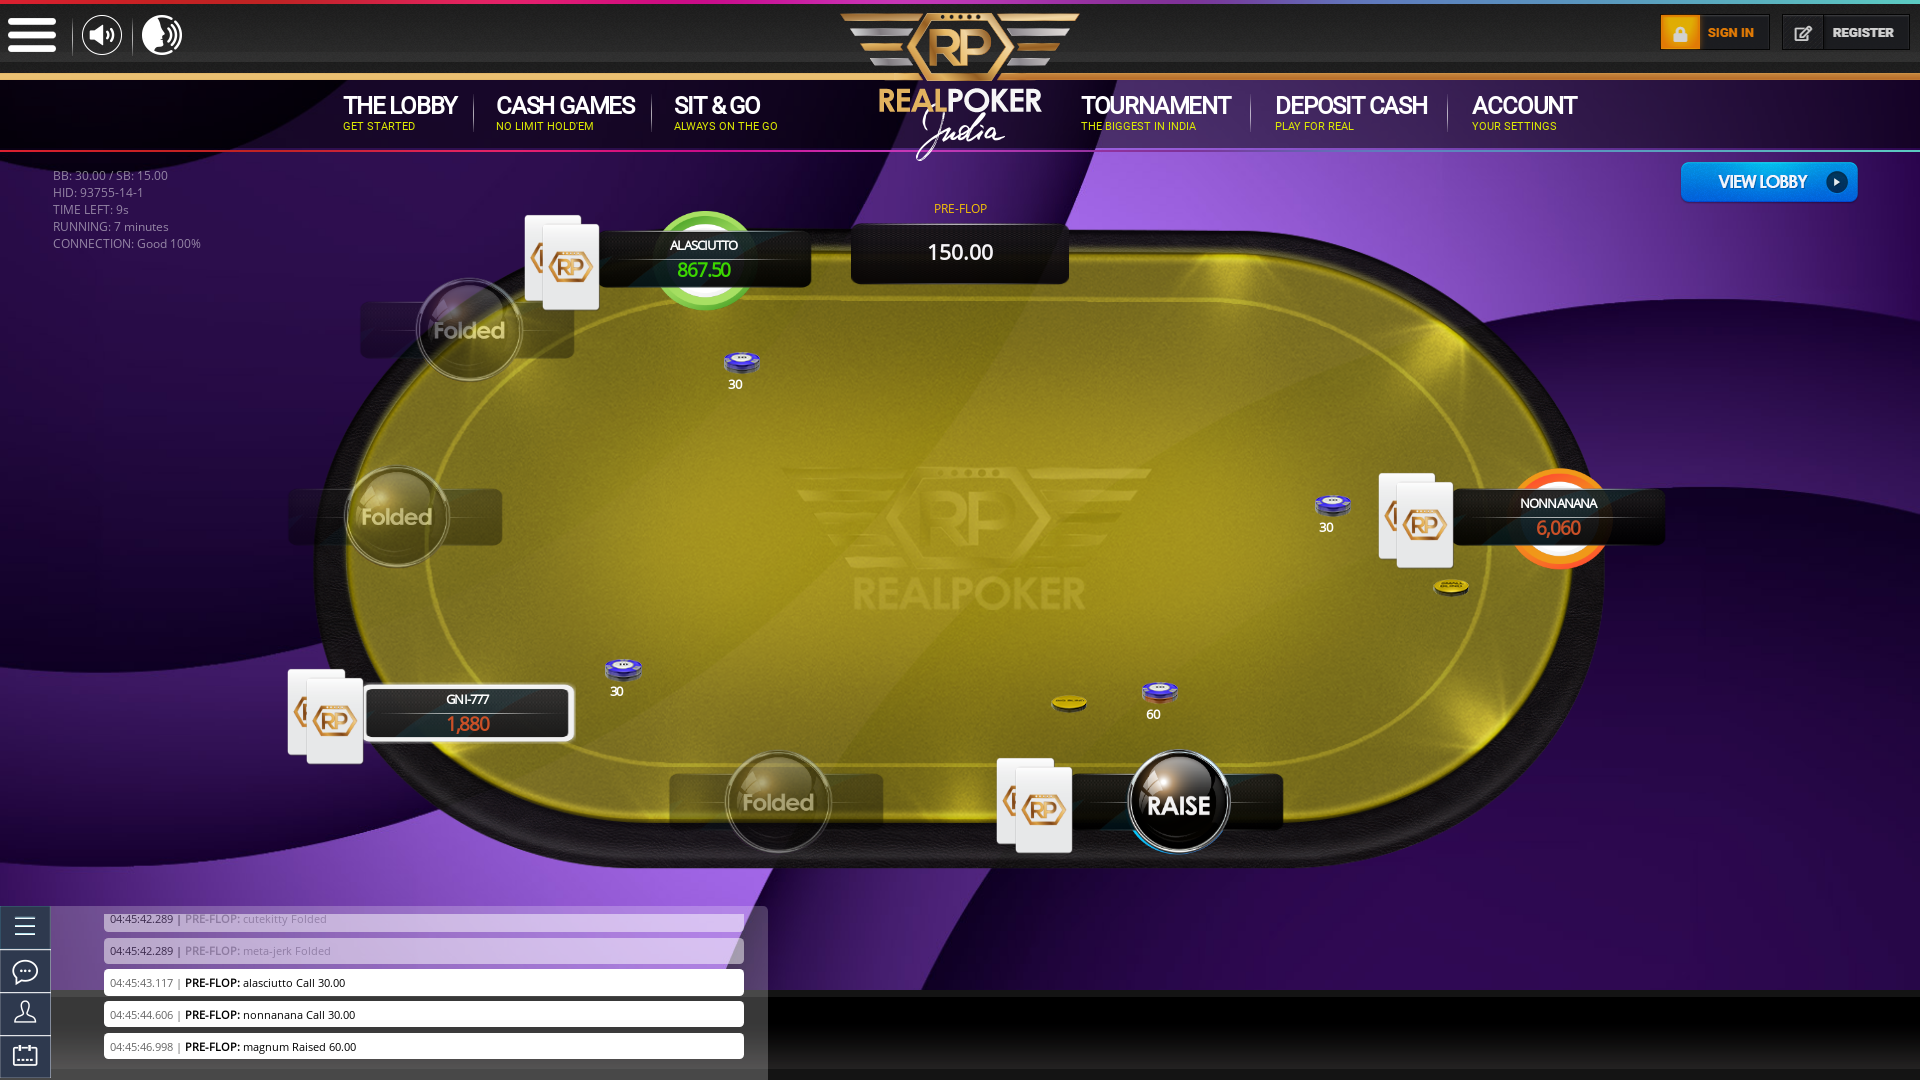 10 player texas holdem table at real poker with the table id 93755